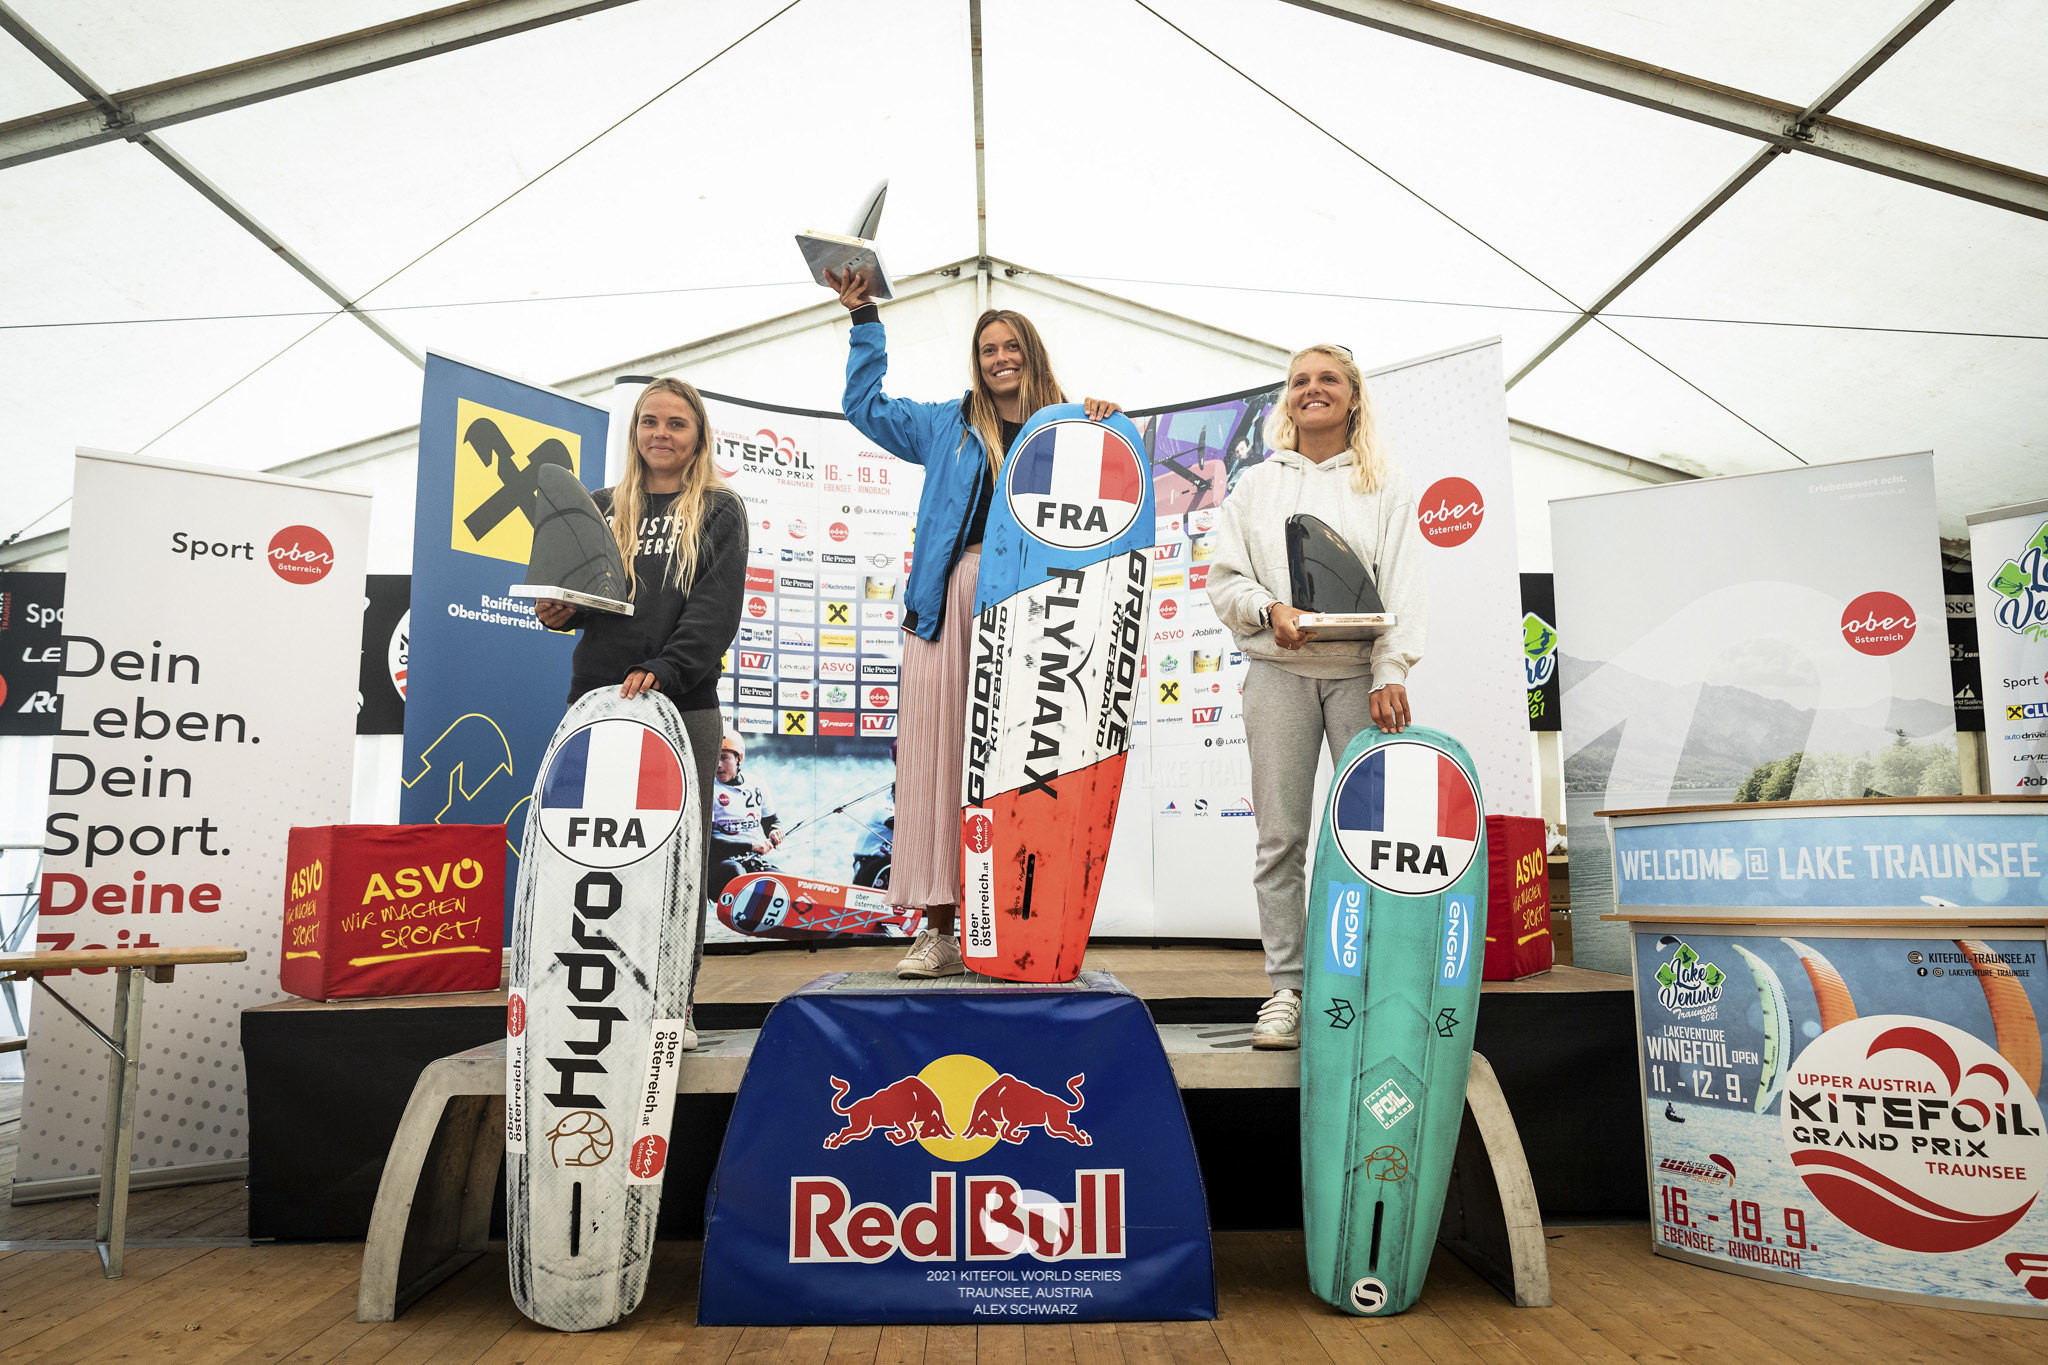 France completed a clean sweep of the women's event at the previous IKA KiteFoil World Series event in Traunsee and will be hoping for more success in Cagliari ©IKA 